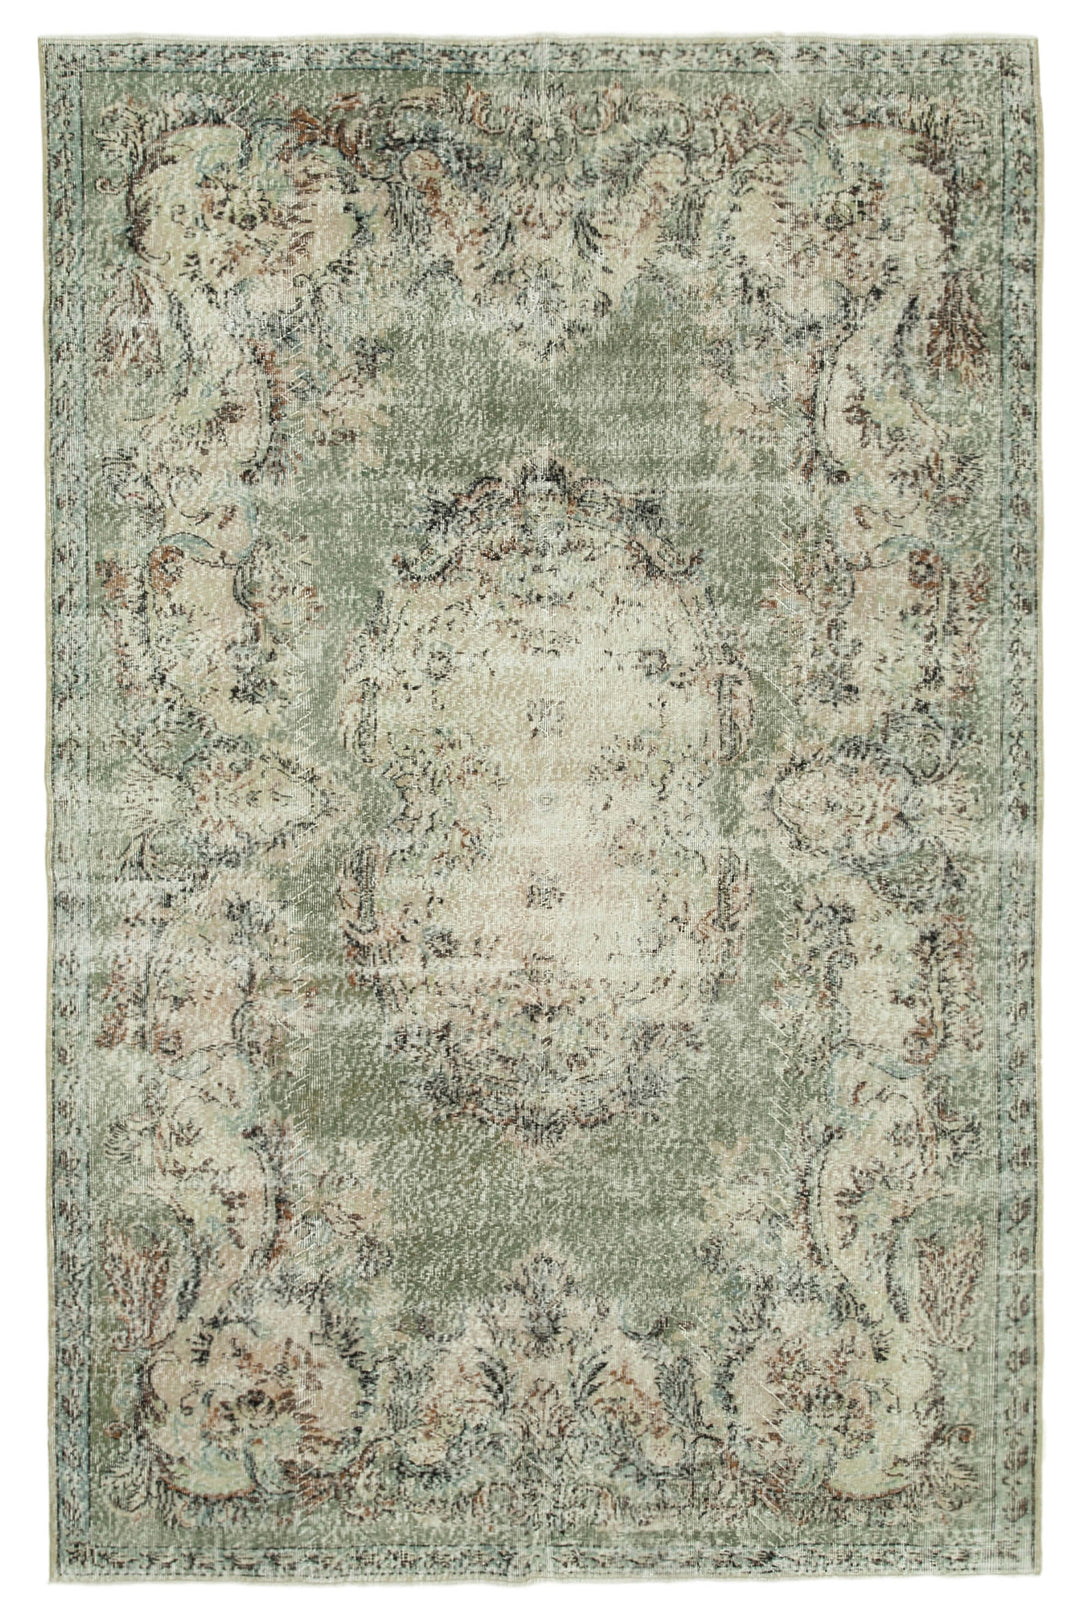 Handmade White Wash Area Rug > Design# OL-AC-36892 > Size: 6'-9" x 10'-7", Carpet Culture Rugs, Handmade Rugs, NYC Rugs, New Rugs, Shop Rugs, Rug Store, Outlet Rugs, SoHo Rugs, Rugs in USA